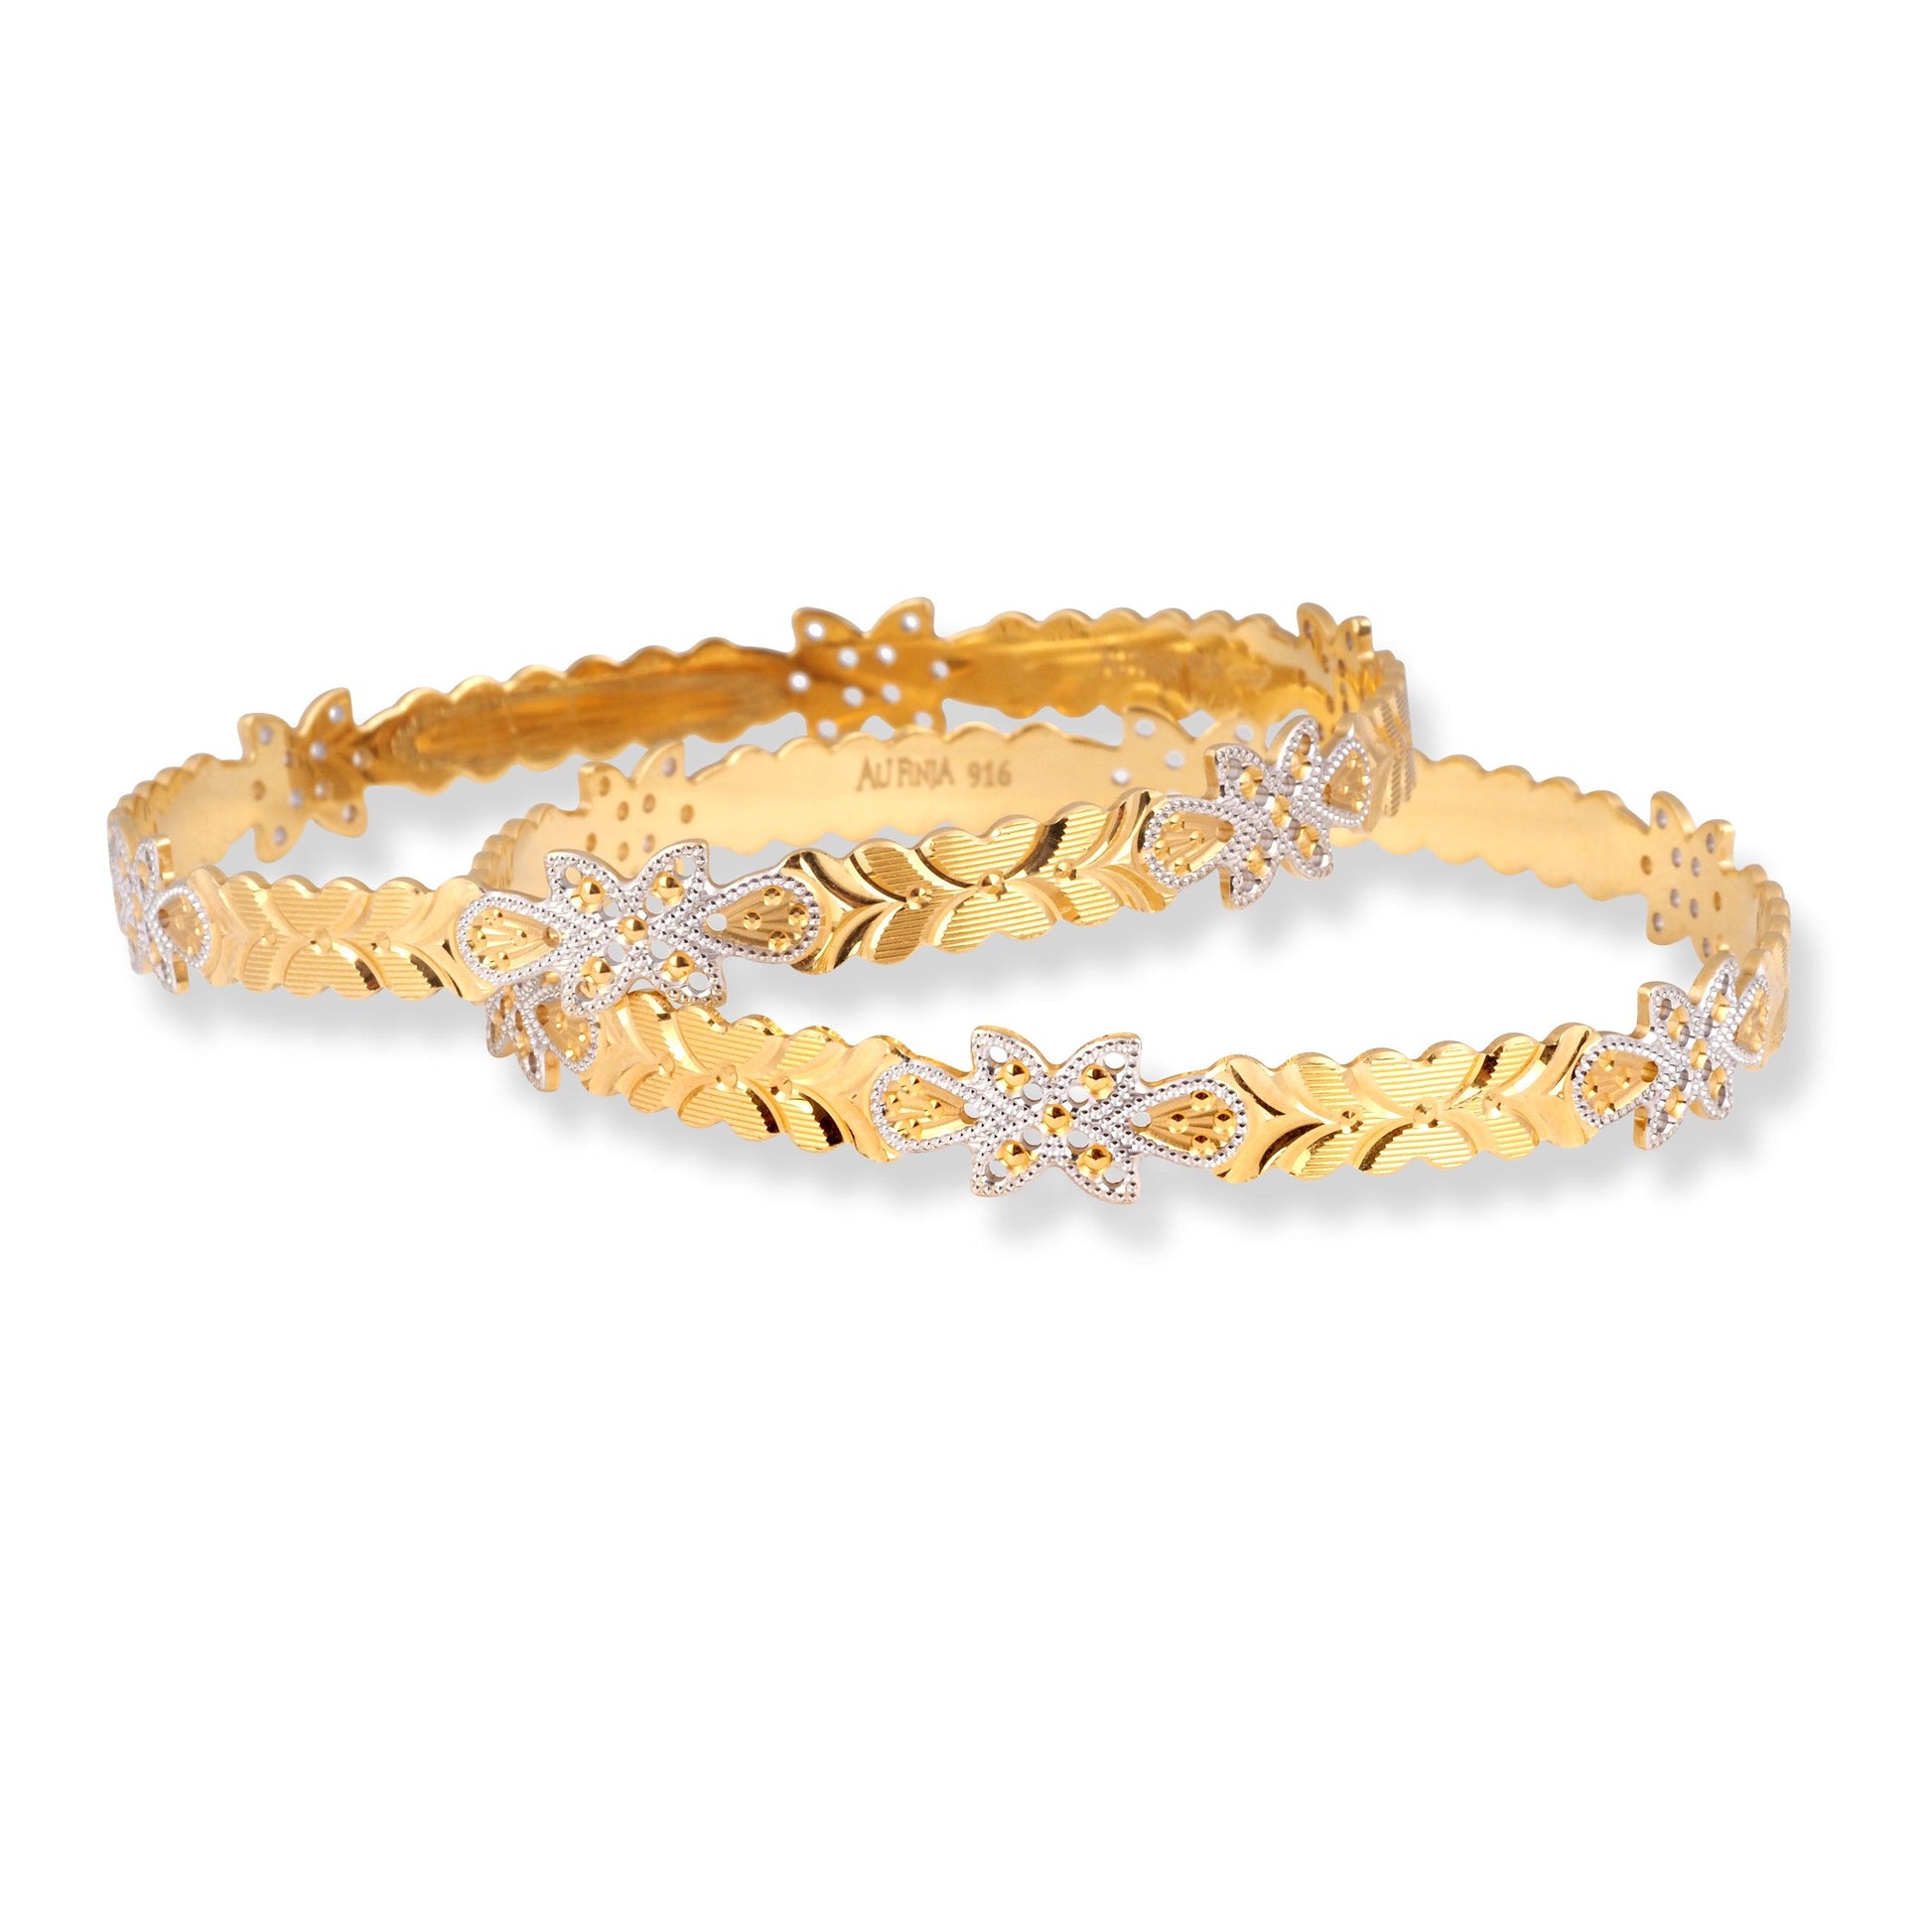 Pair of 22ct Gold Bangles with Flower Design and Rhodium Plating B-8566 - Minar Jewellers